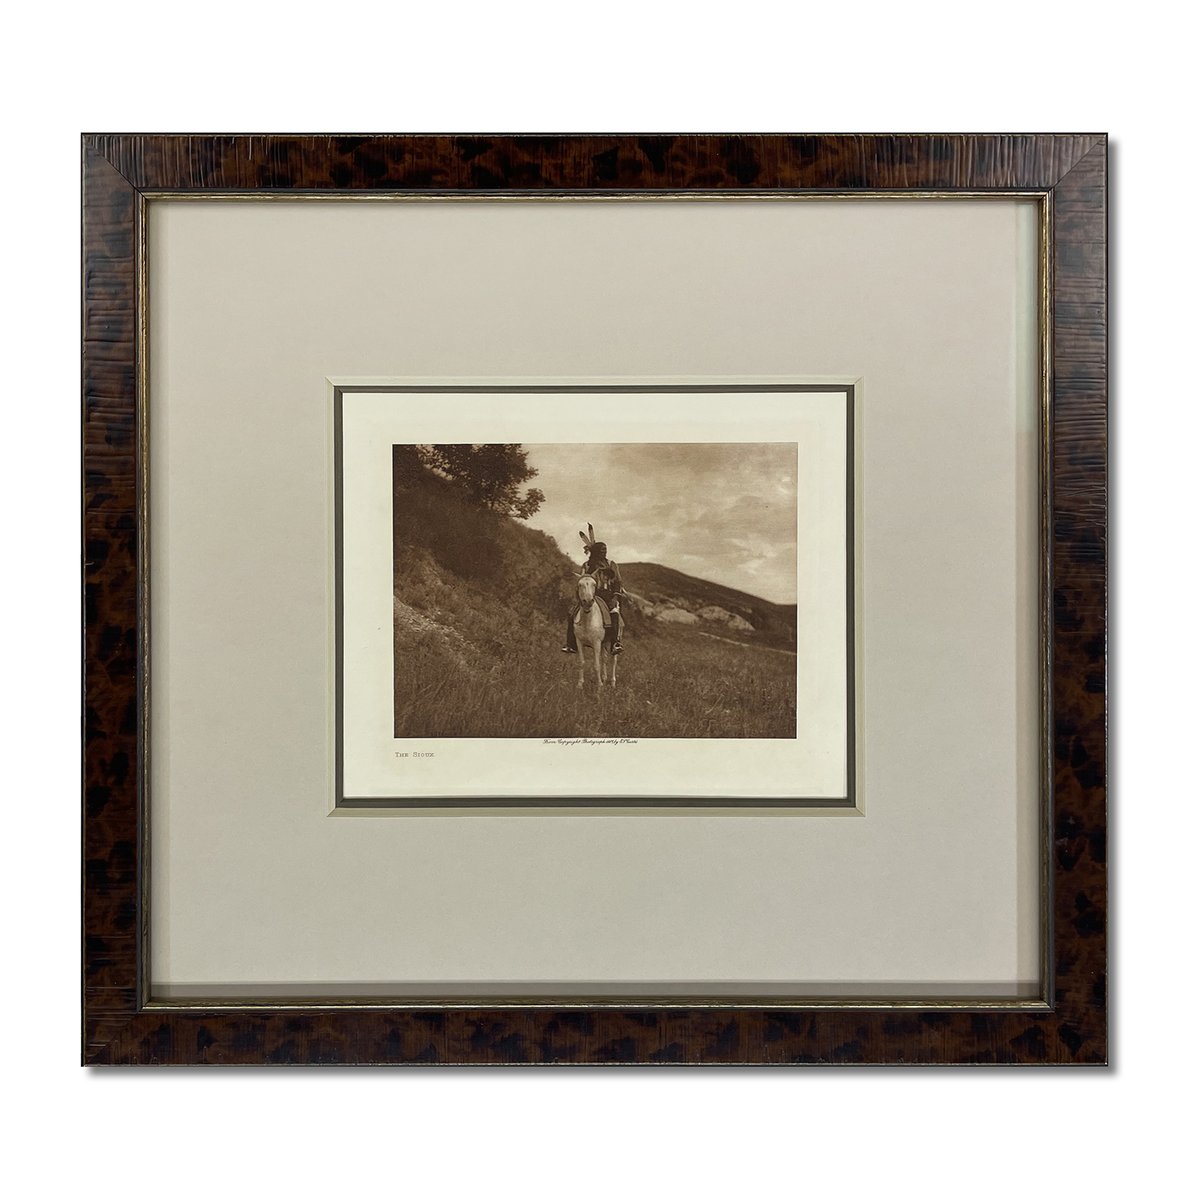 'The Sioux' - framed Curtis Photogravure  
Edward S. Curtis (2/19/1868 ~ 10/19/1952) 

#northpennart #custompictureframing #edwardcurtis #photogravure #photography #southwest #nativeamerican